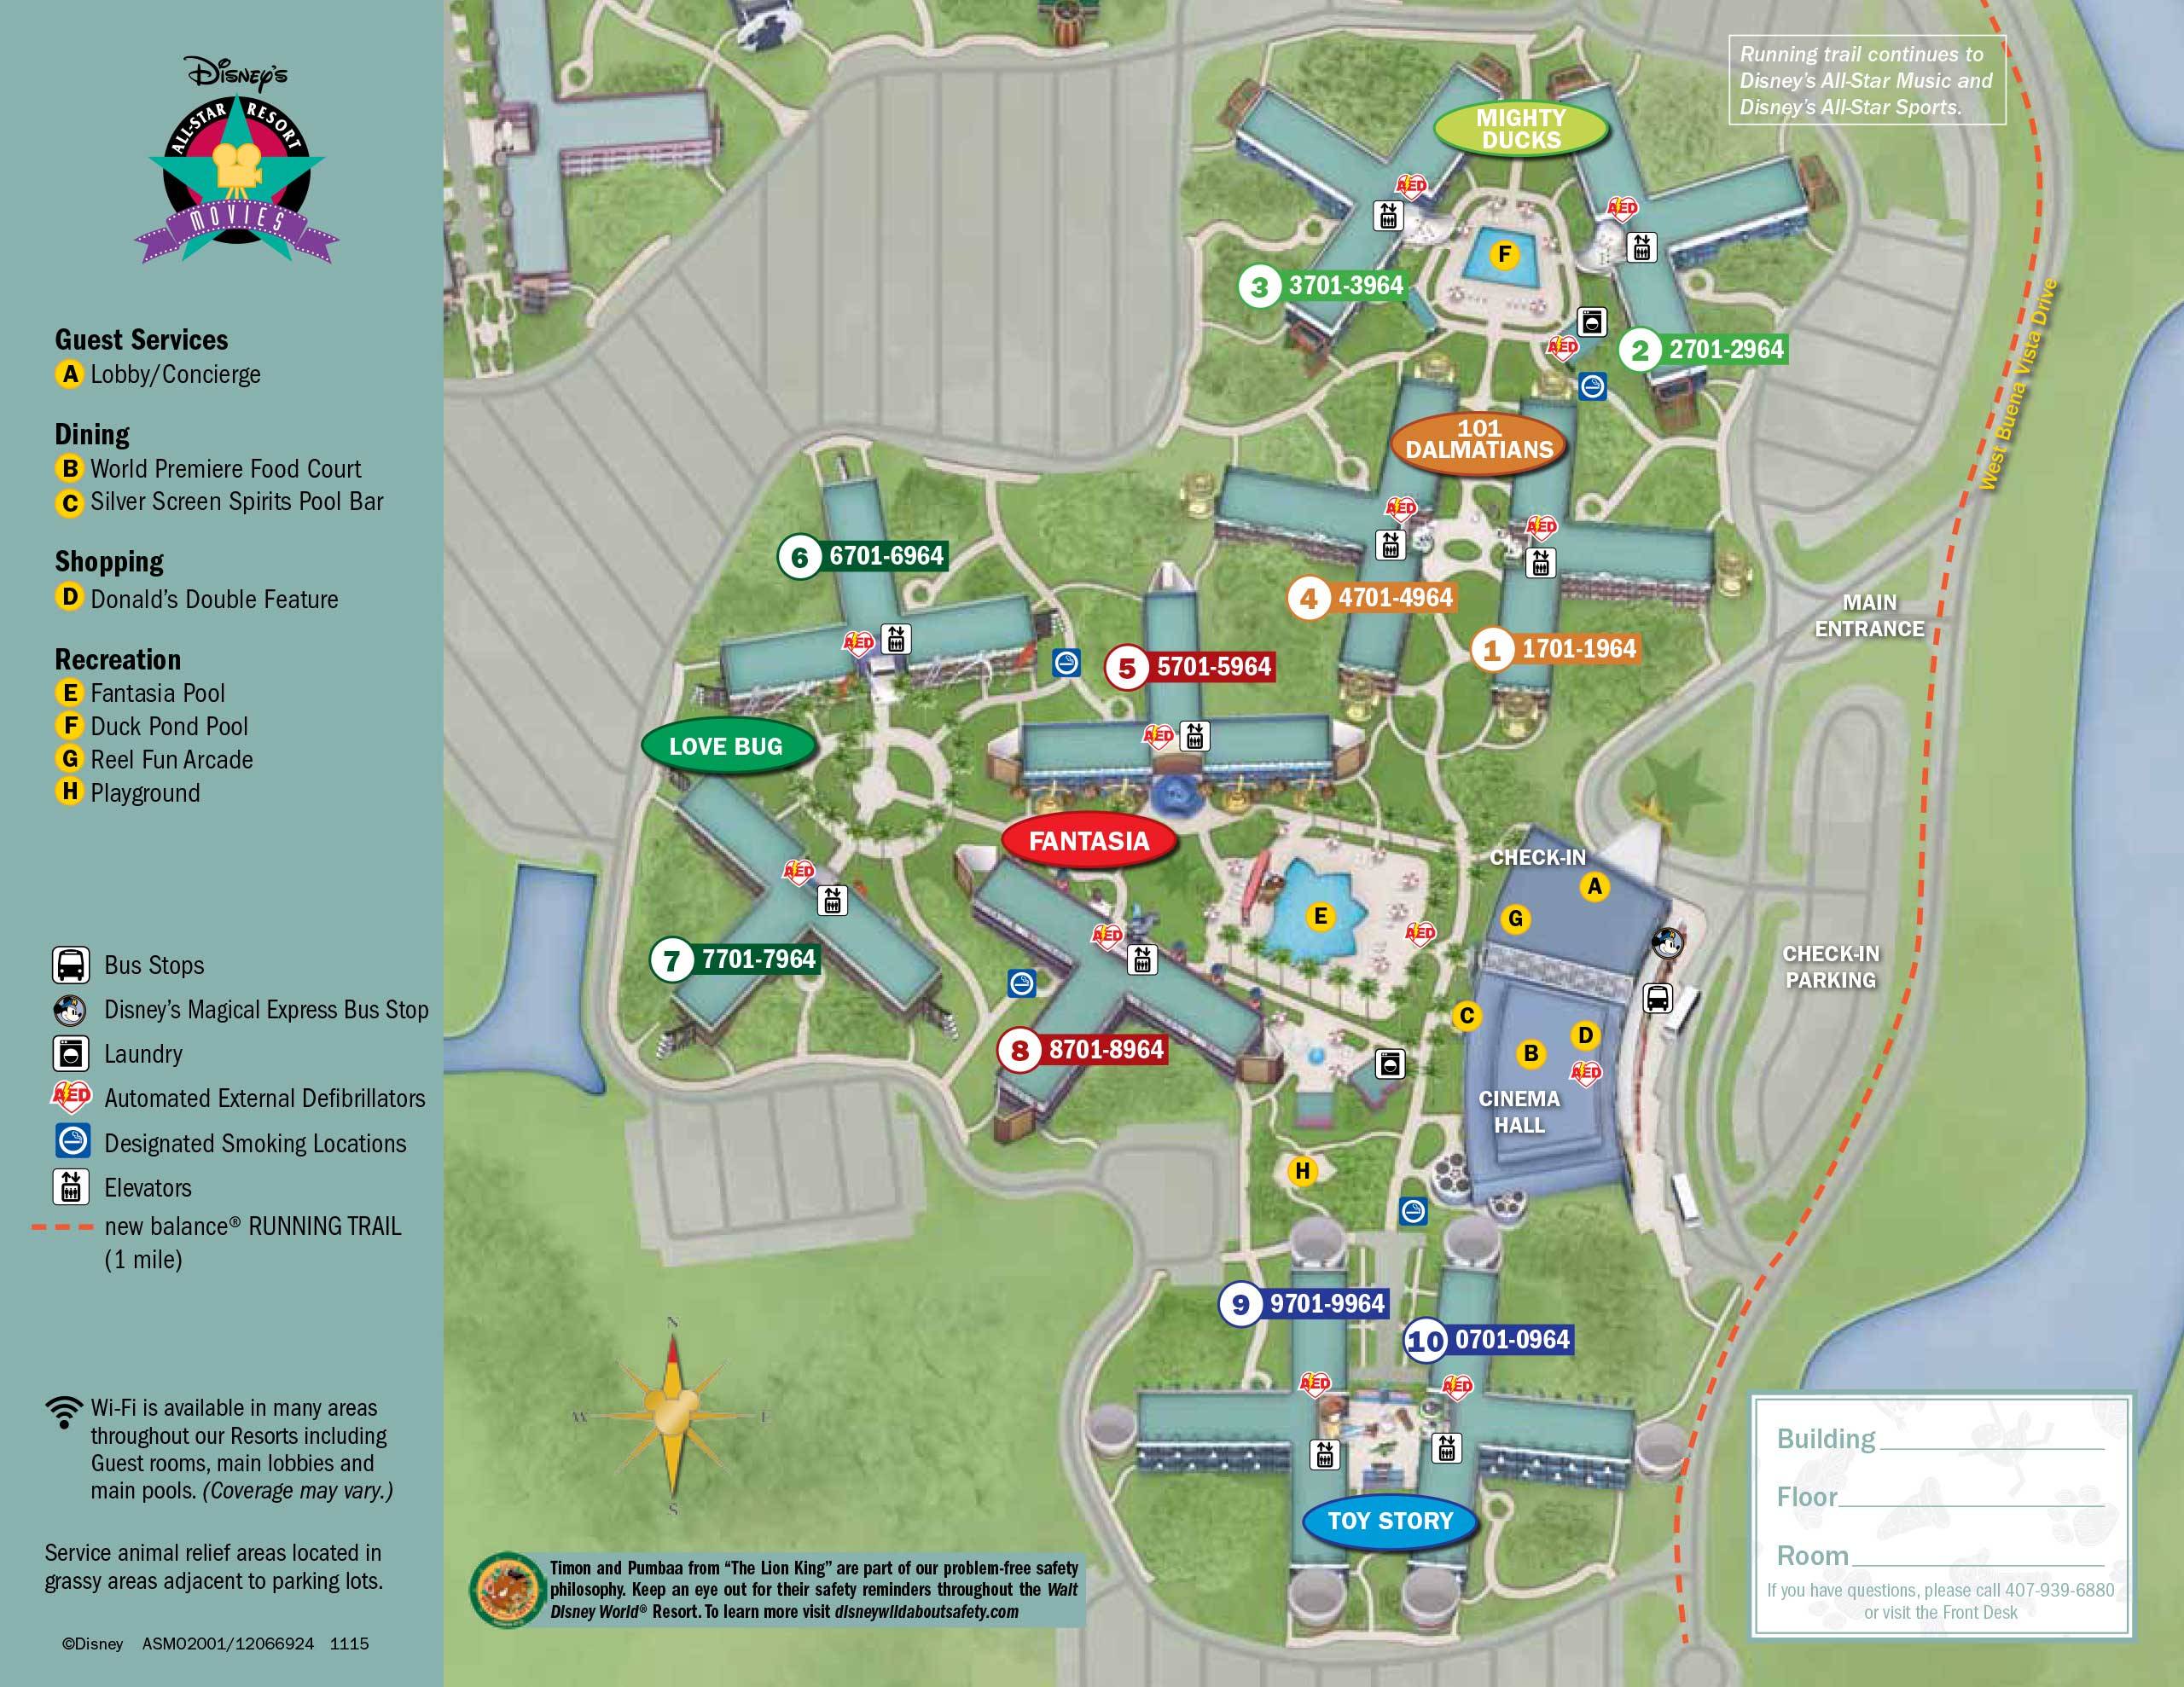 Disney's All Star Movies map